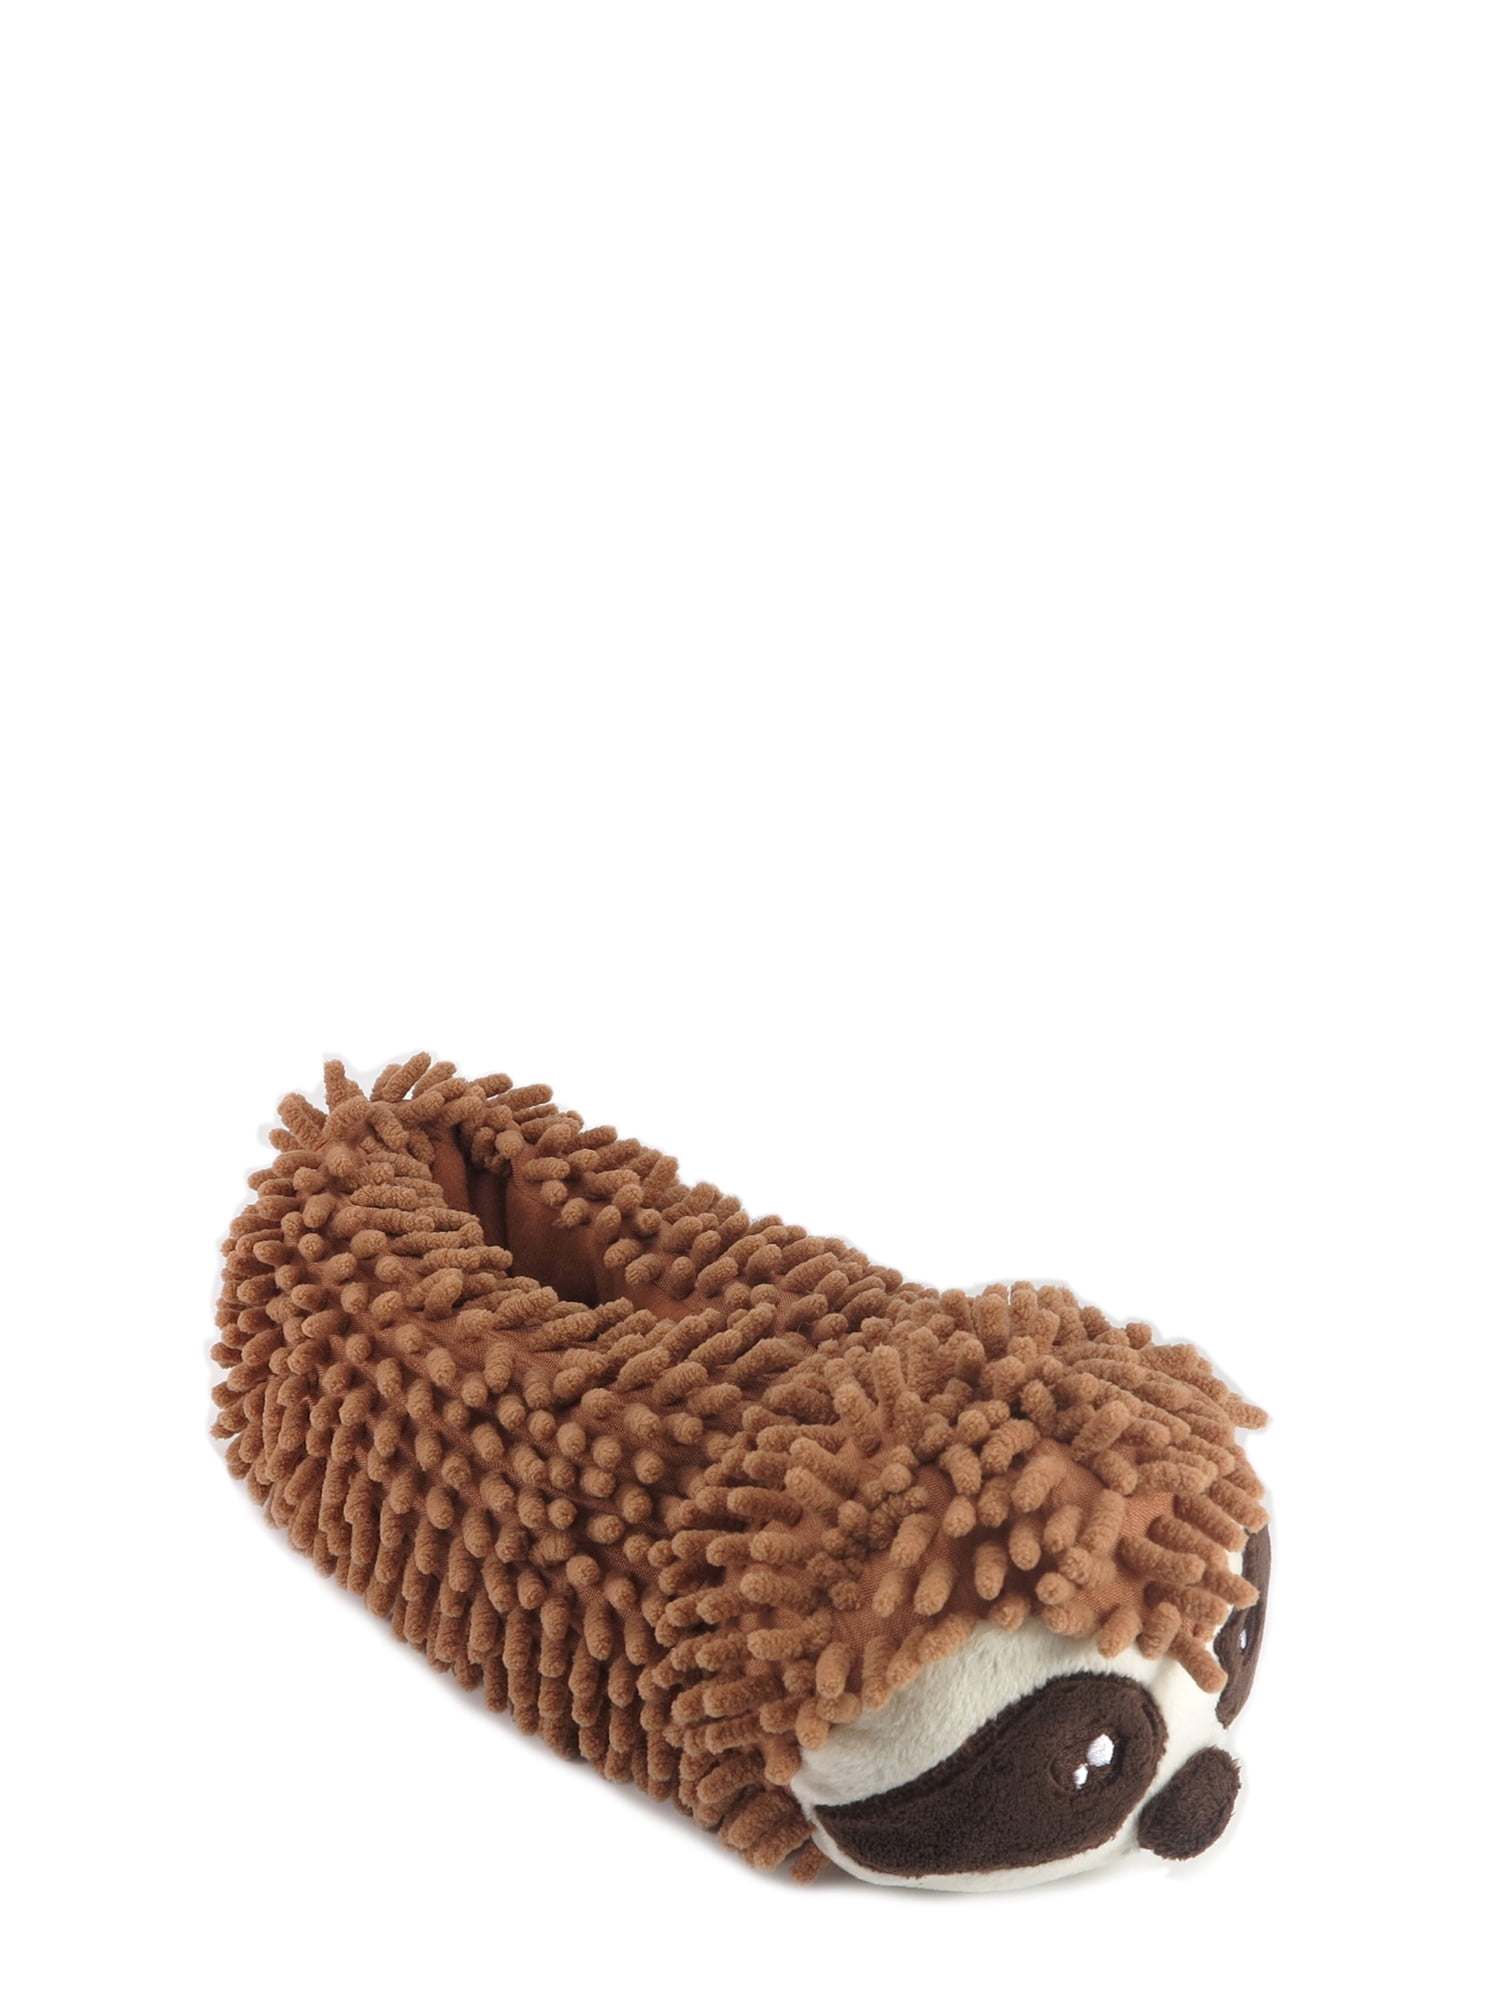 Brown 1-2 US Slumberzzz Childrens/Kids Sloth Slippers